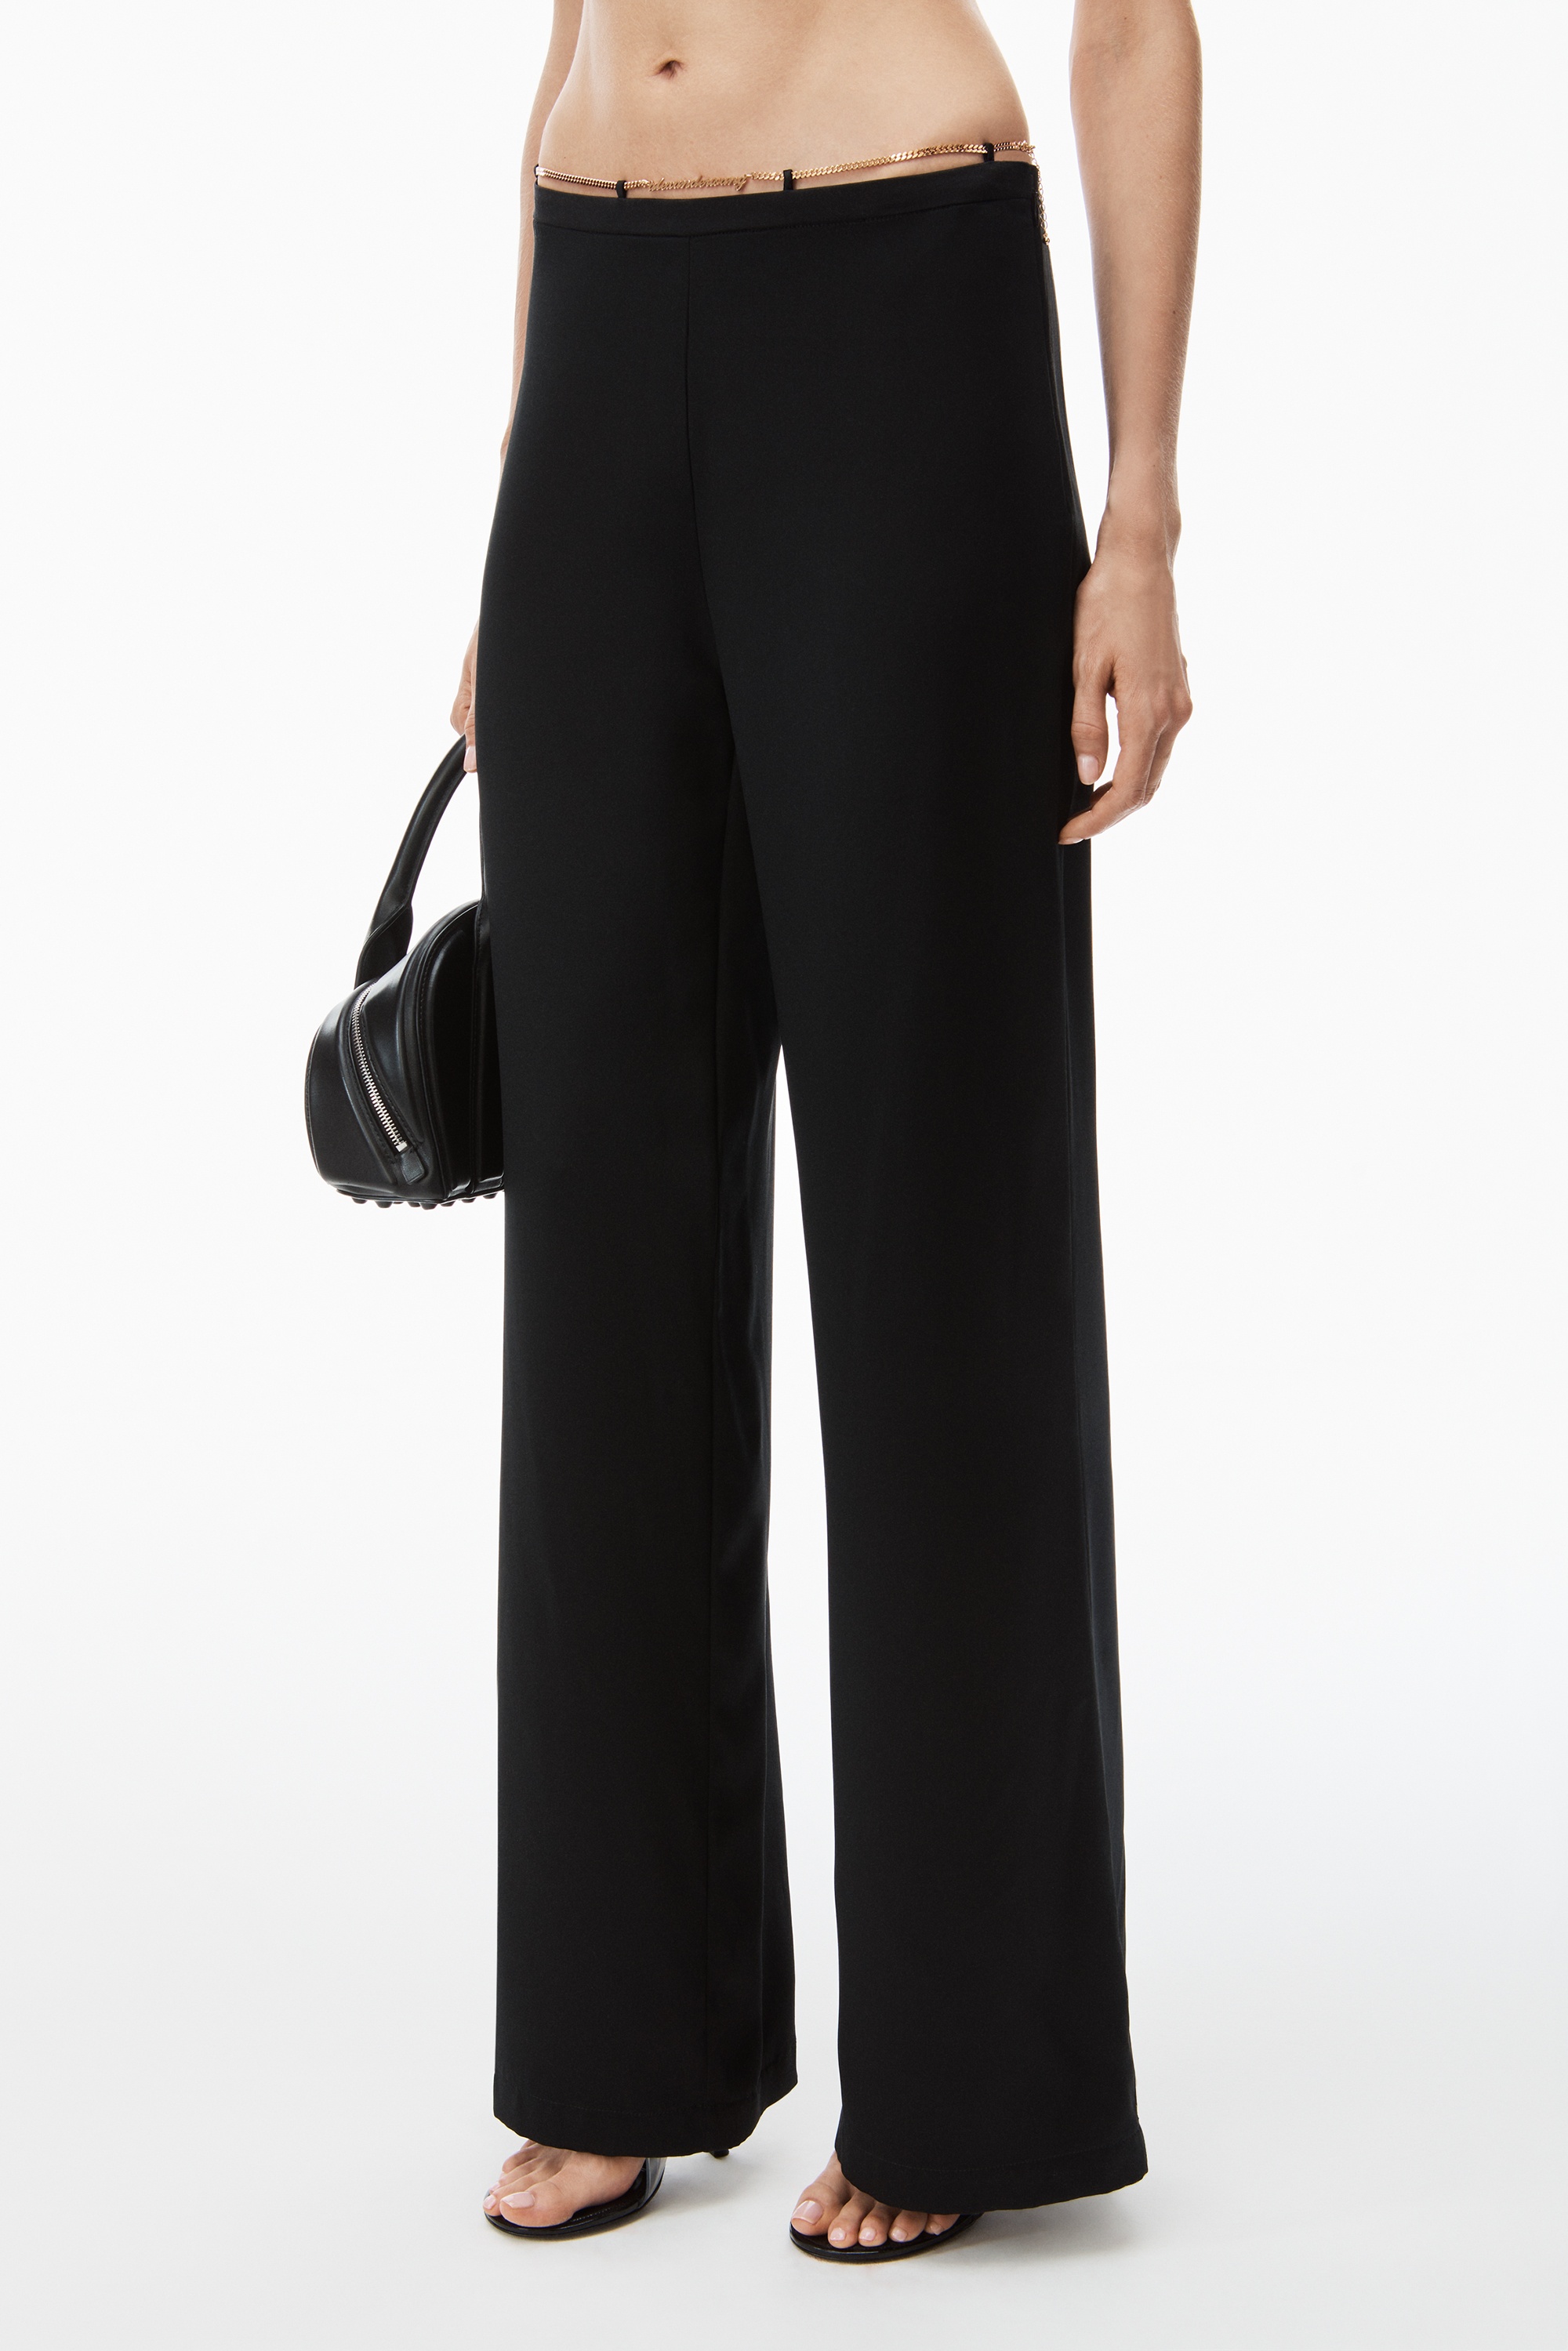 silk charmeuse flared low rise pant with nameplate - 3